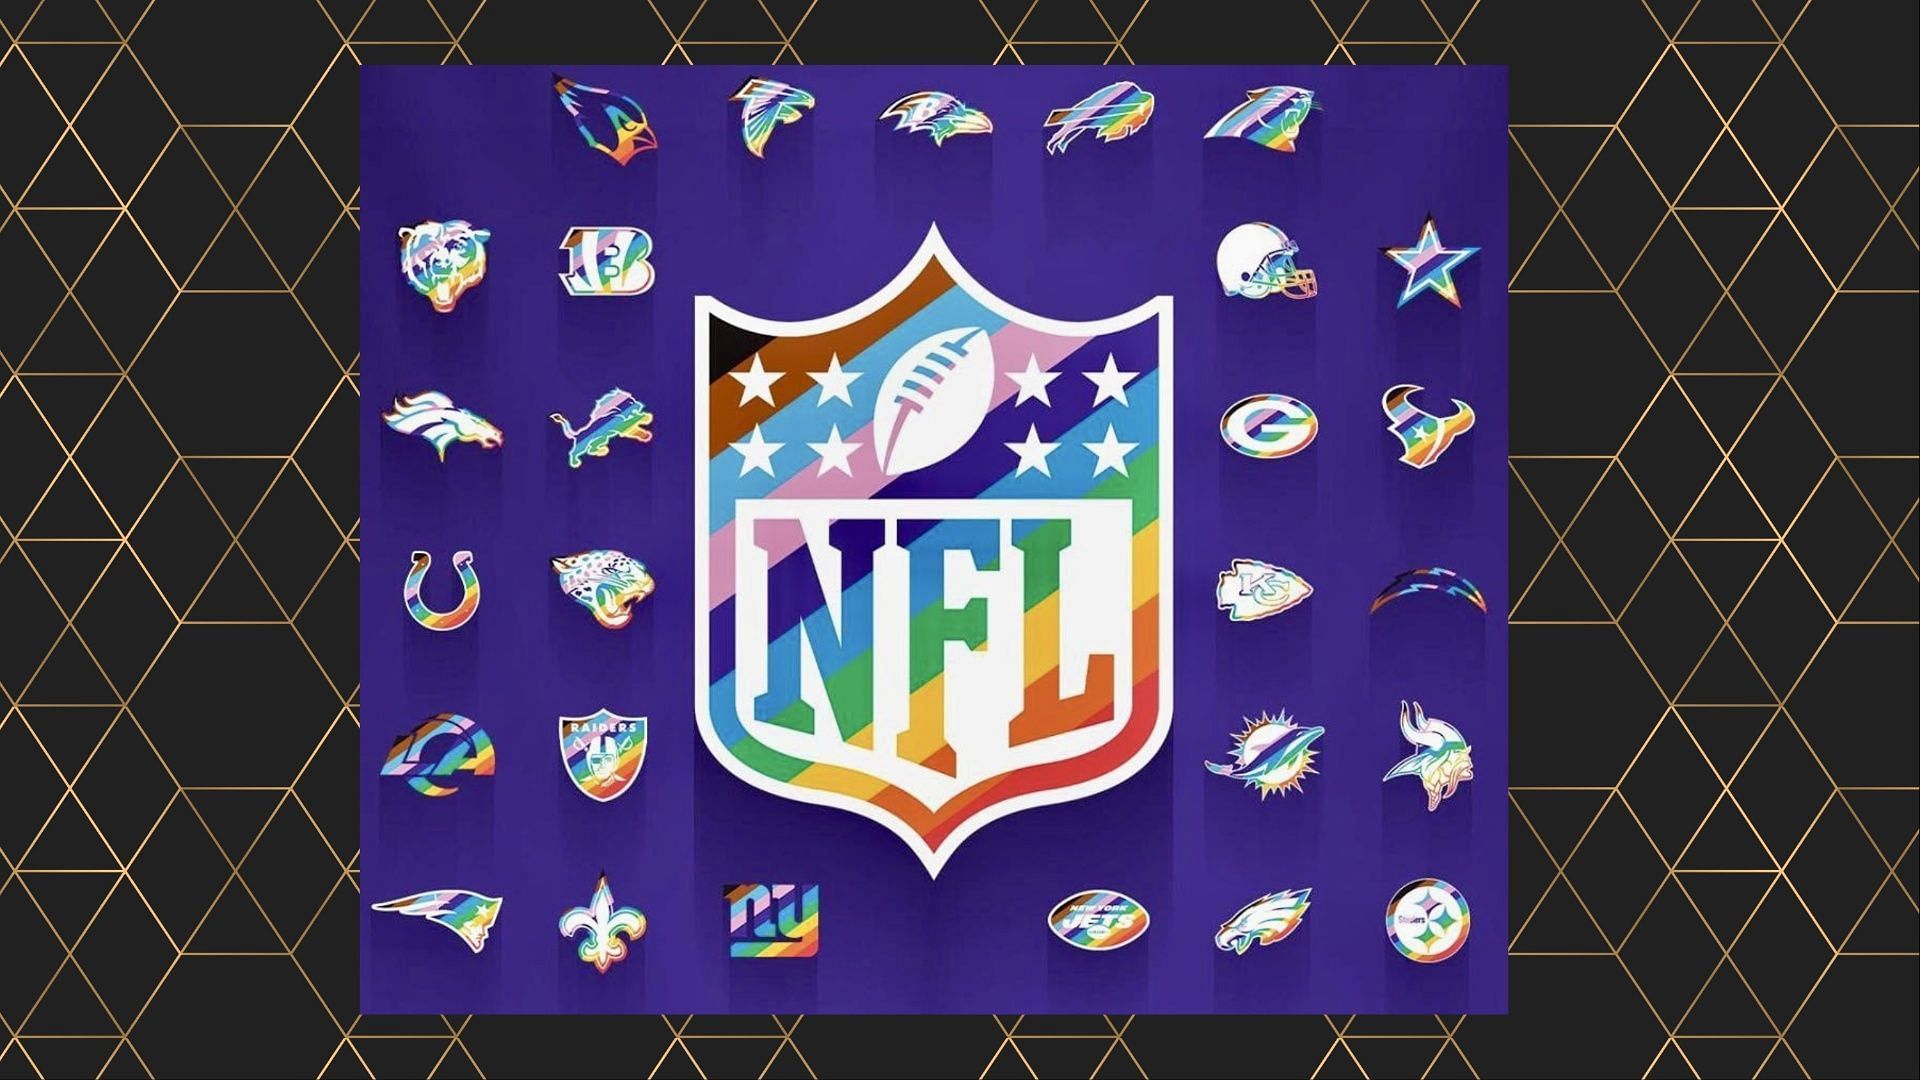 Twitter angry at alleged National Football League pride logo (Image via Twitter/@Alphafox78)